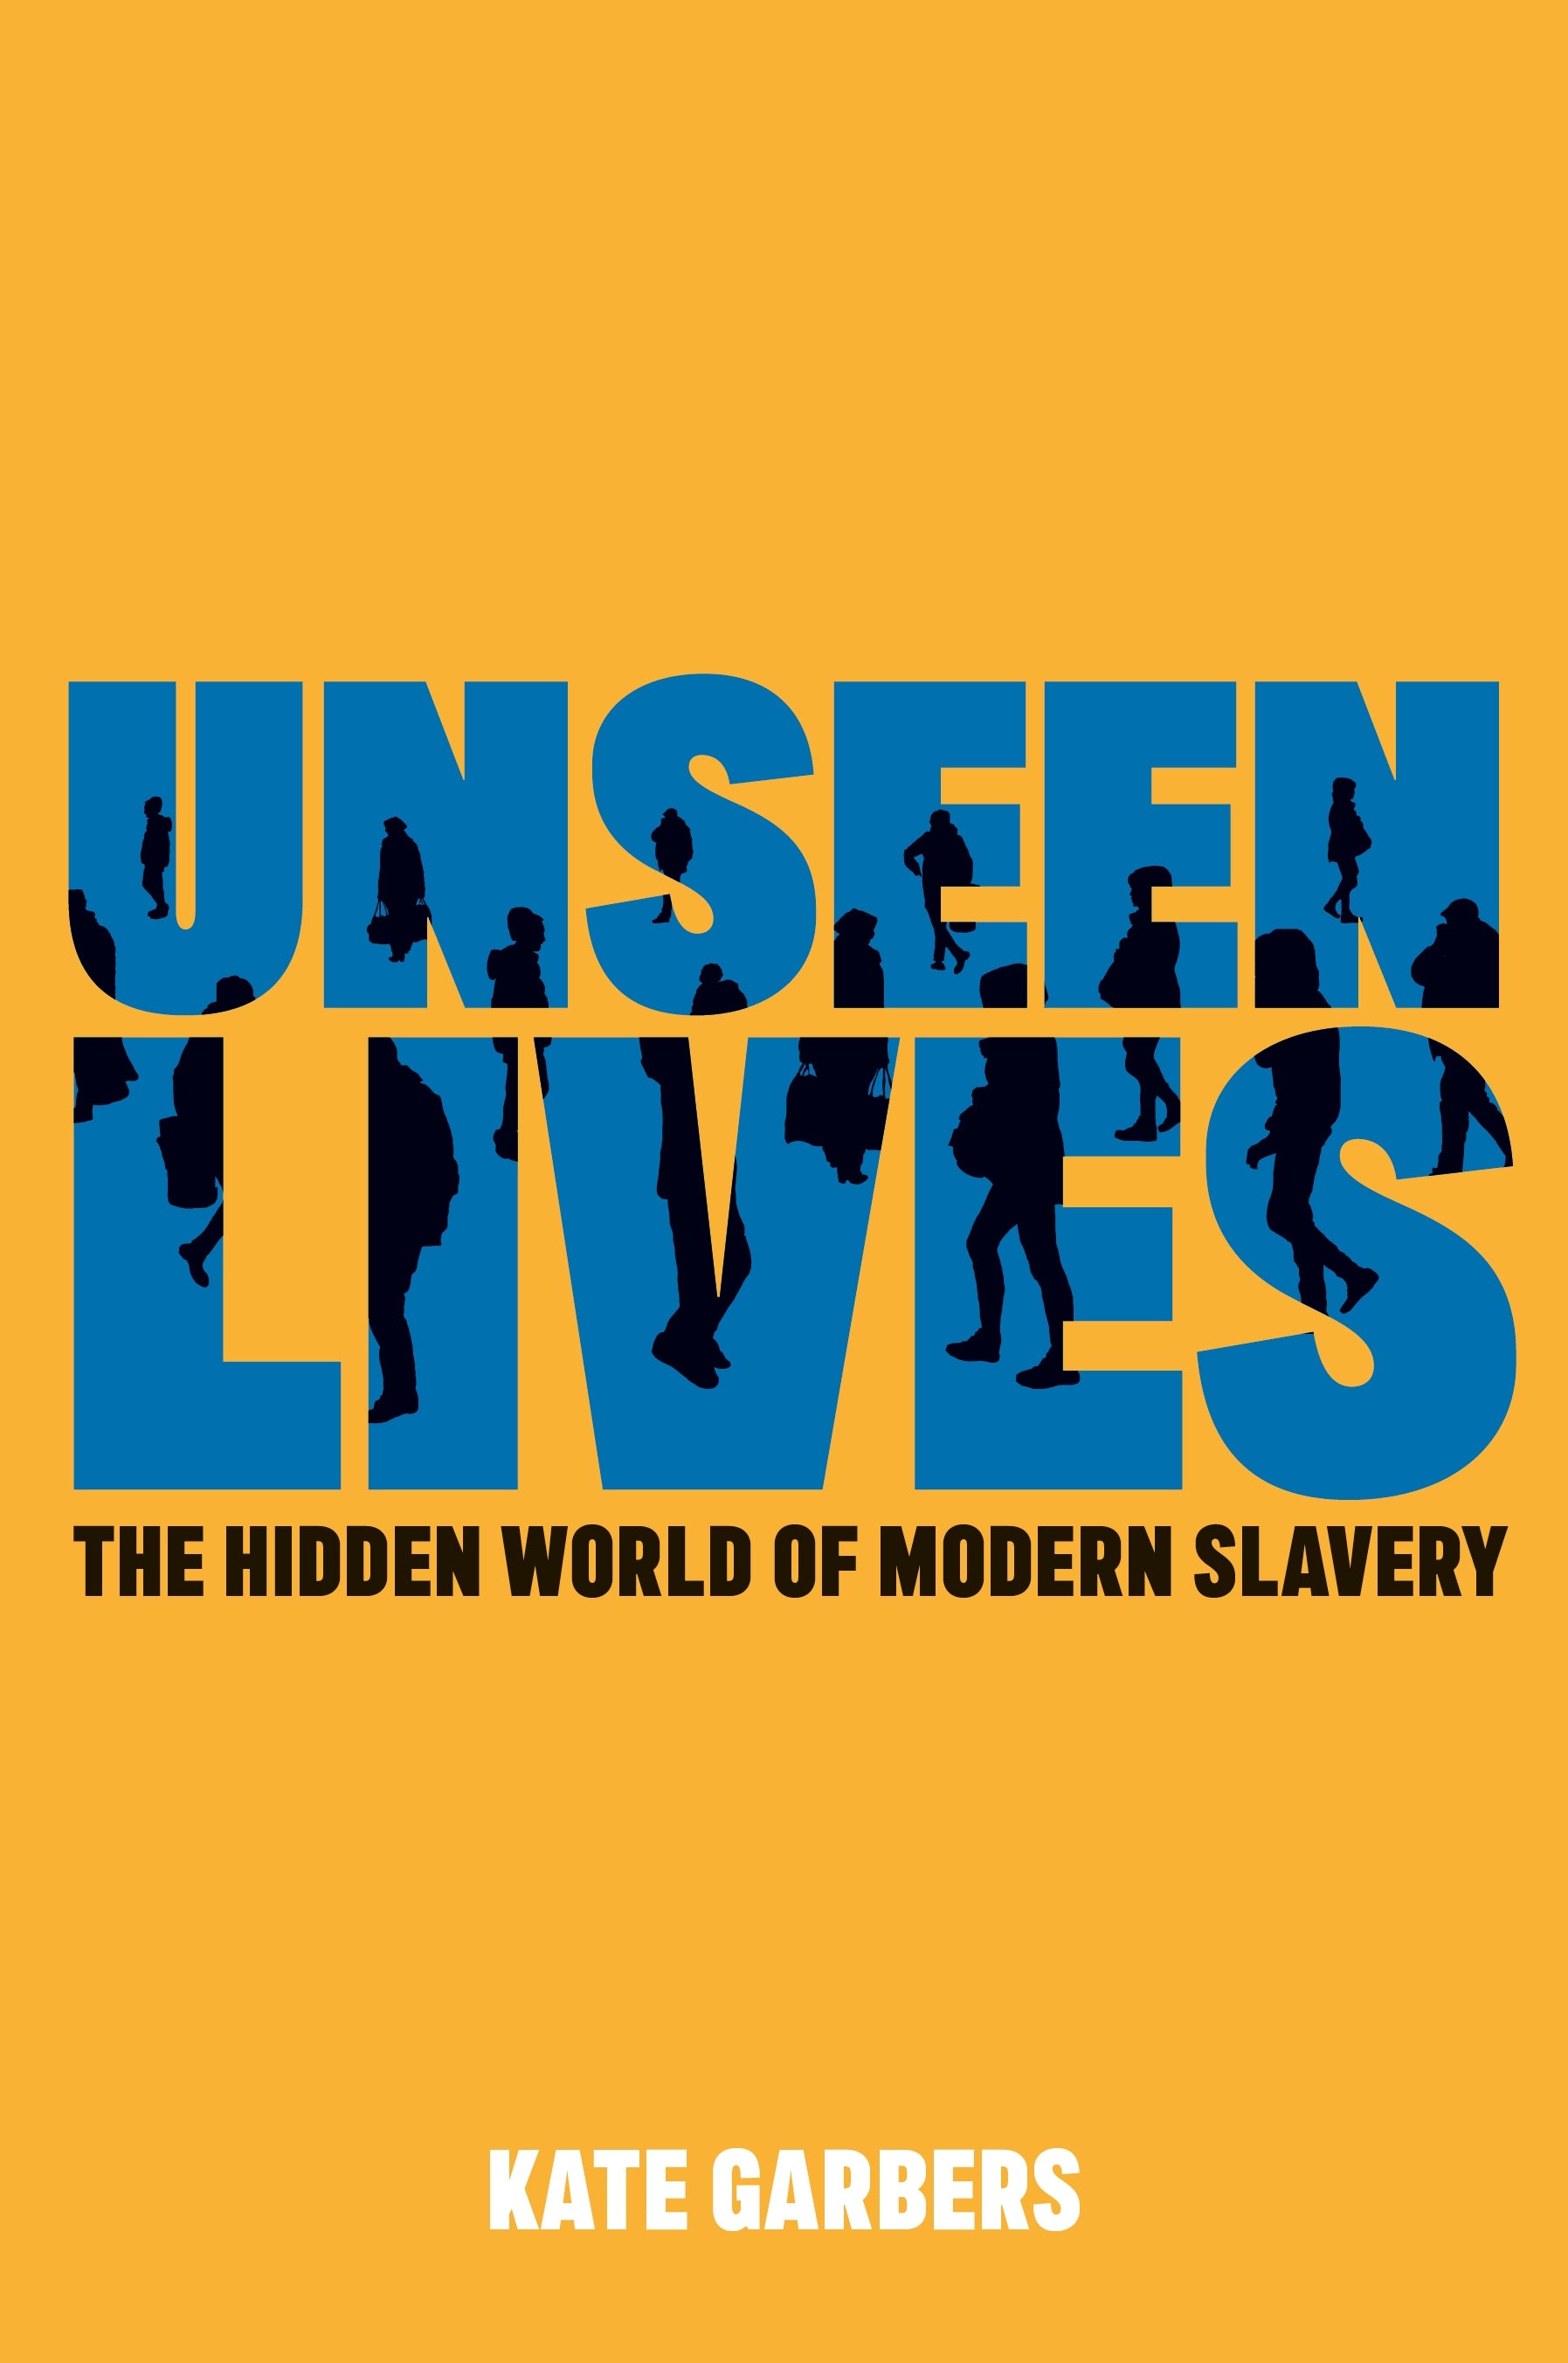 Unseen Lives by Kate Garbers